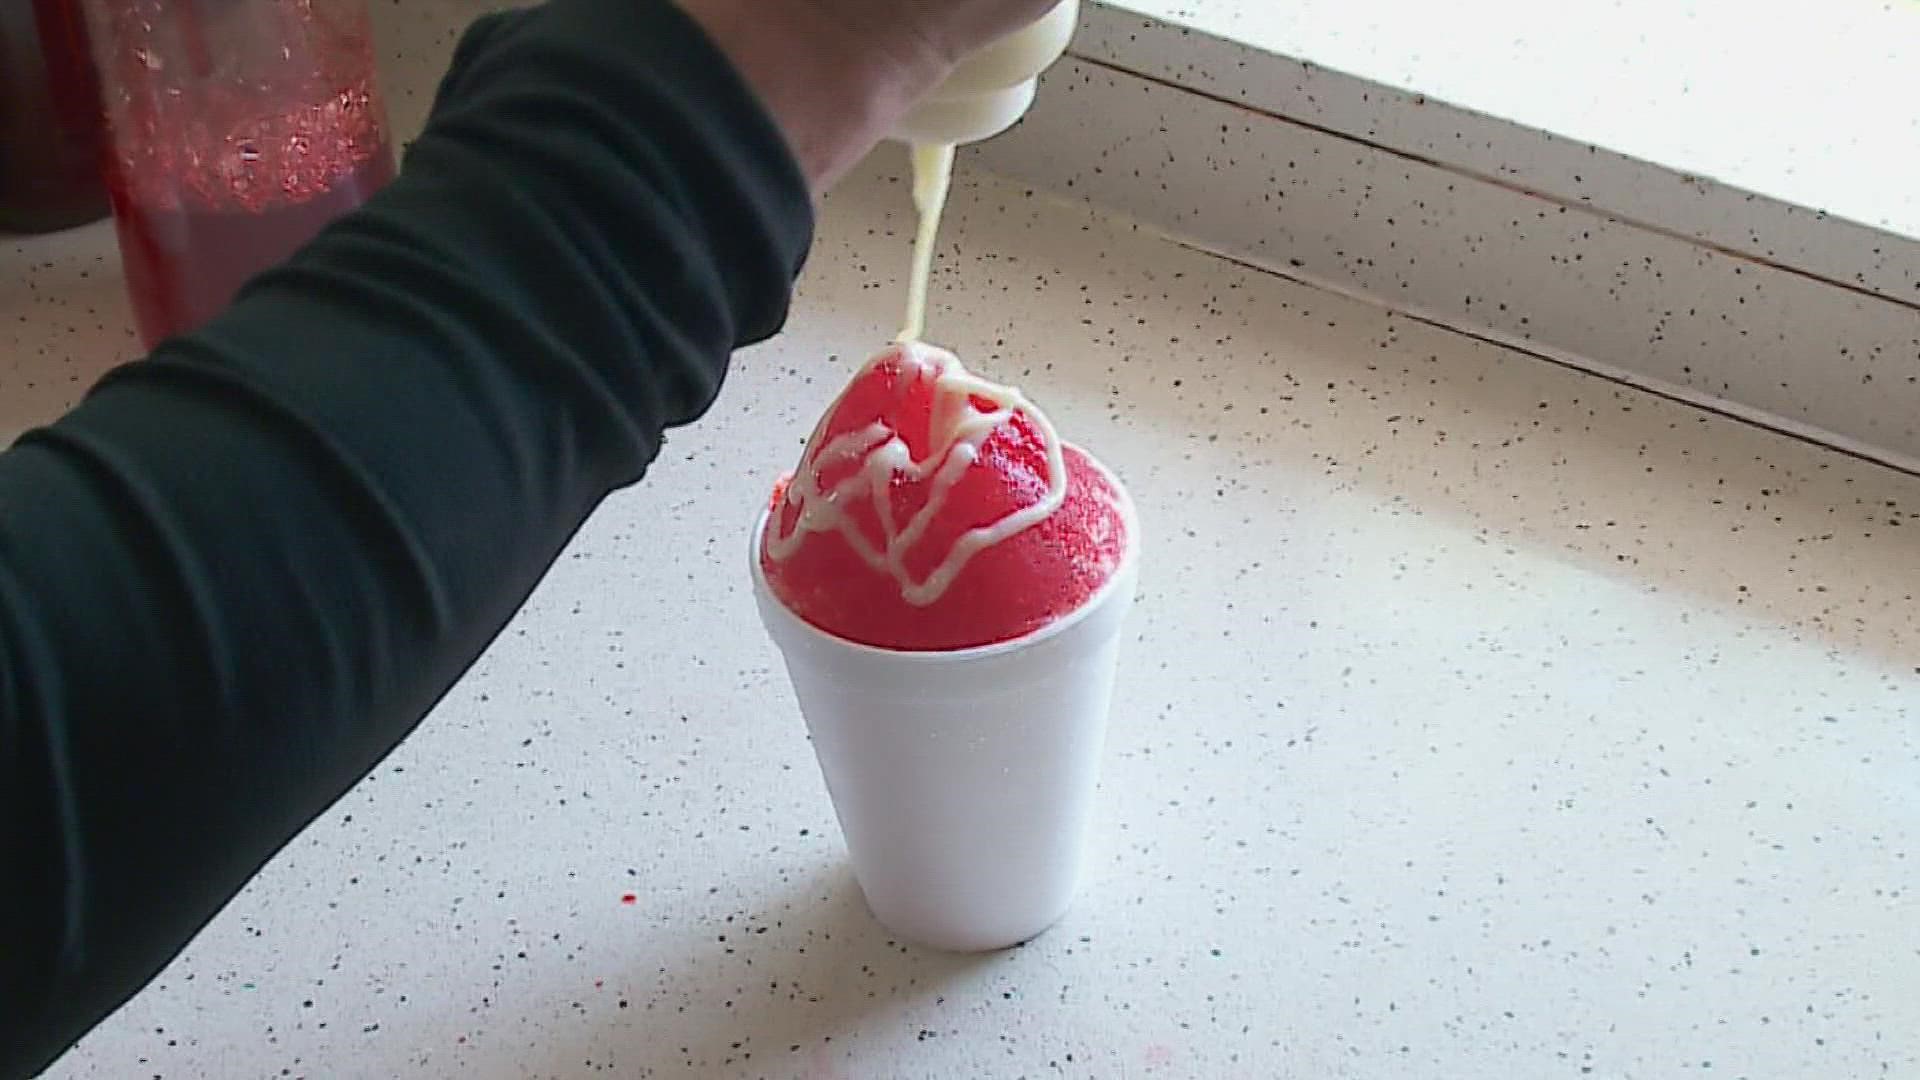 Sal's Sno-Ball Stand has been a Metairie Road staple since 1959.